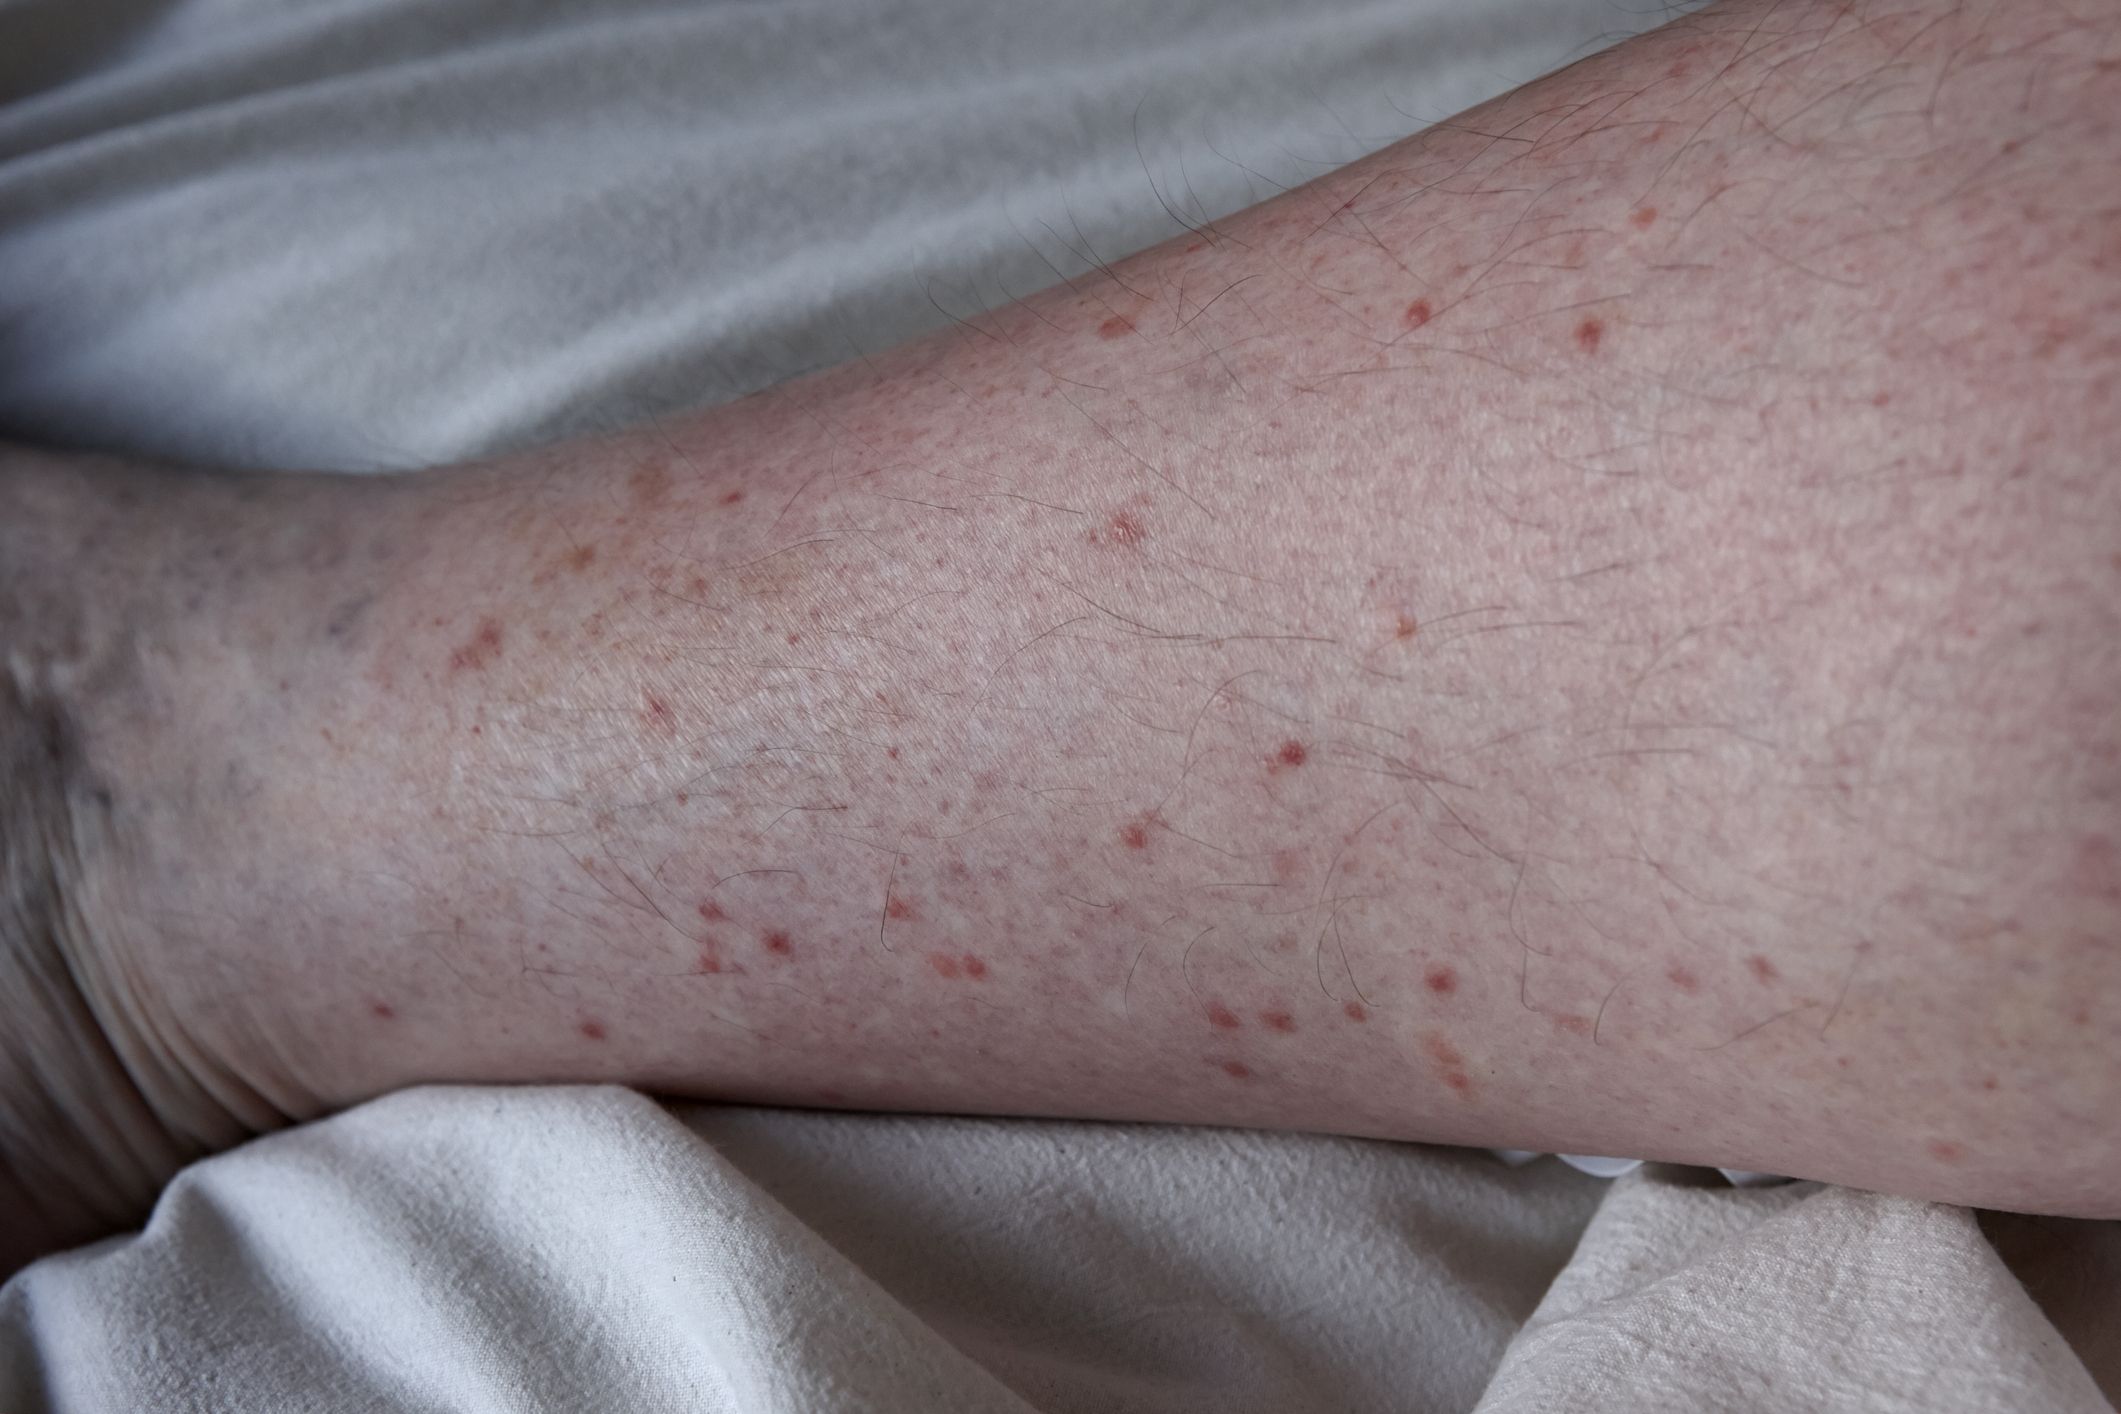 Bites and Stings: Pictures, Causes, Symptoms, and Treatment